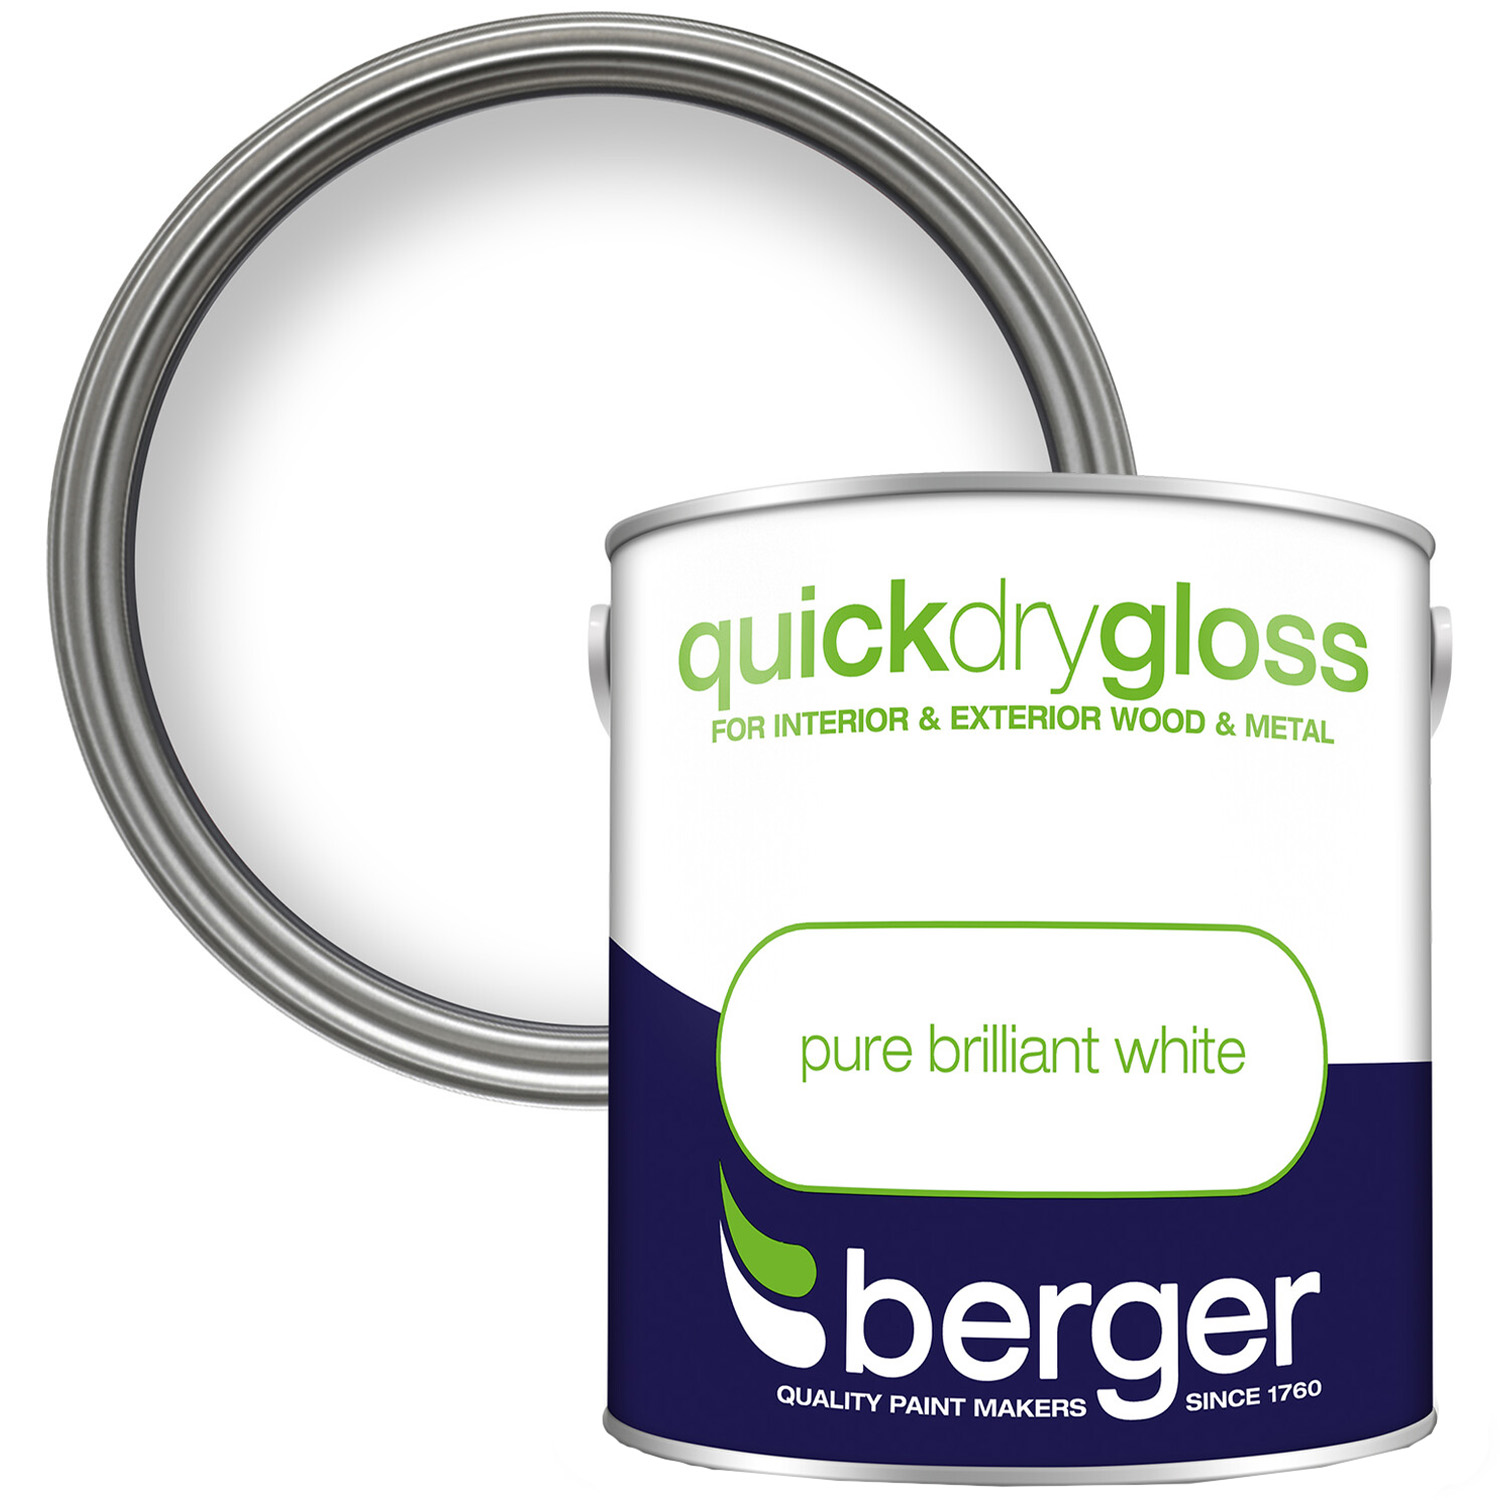 Berger Wood and Metal Pure Brilliant White Quick Dry Gloss Paint 2.5L Image 1